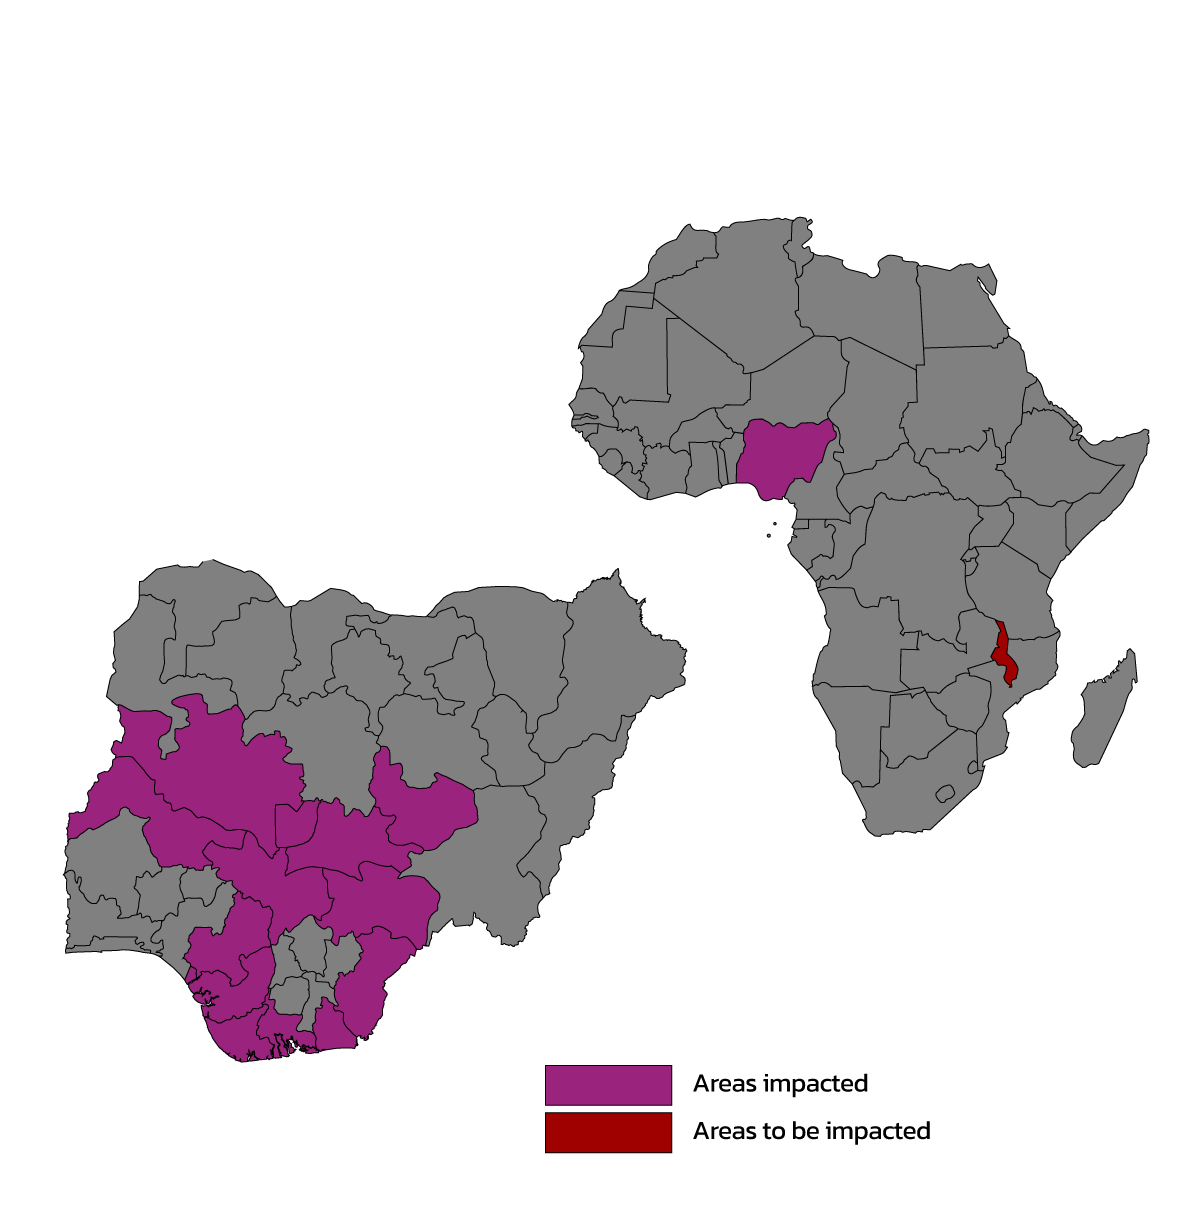 Map of Nigeria and Africa showing the areas where IGE-SRH have impacted